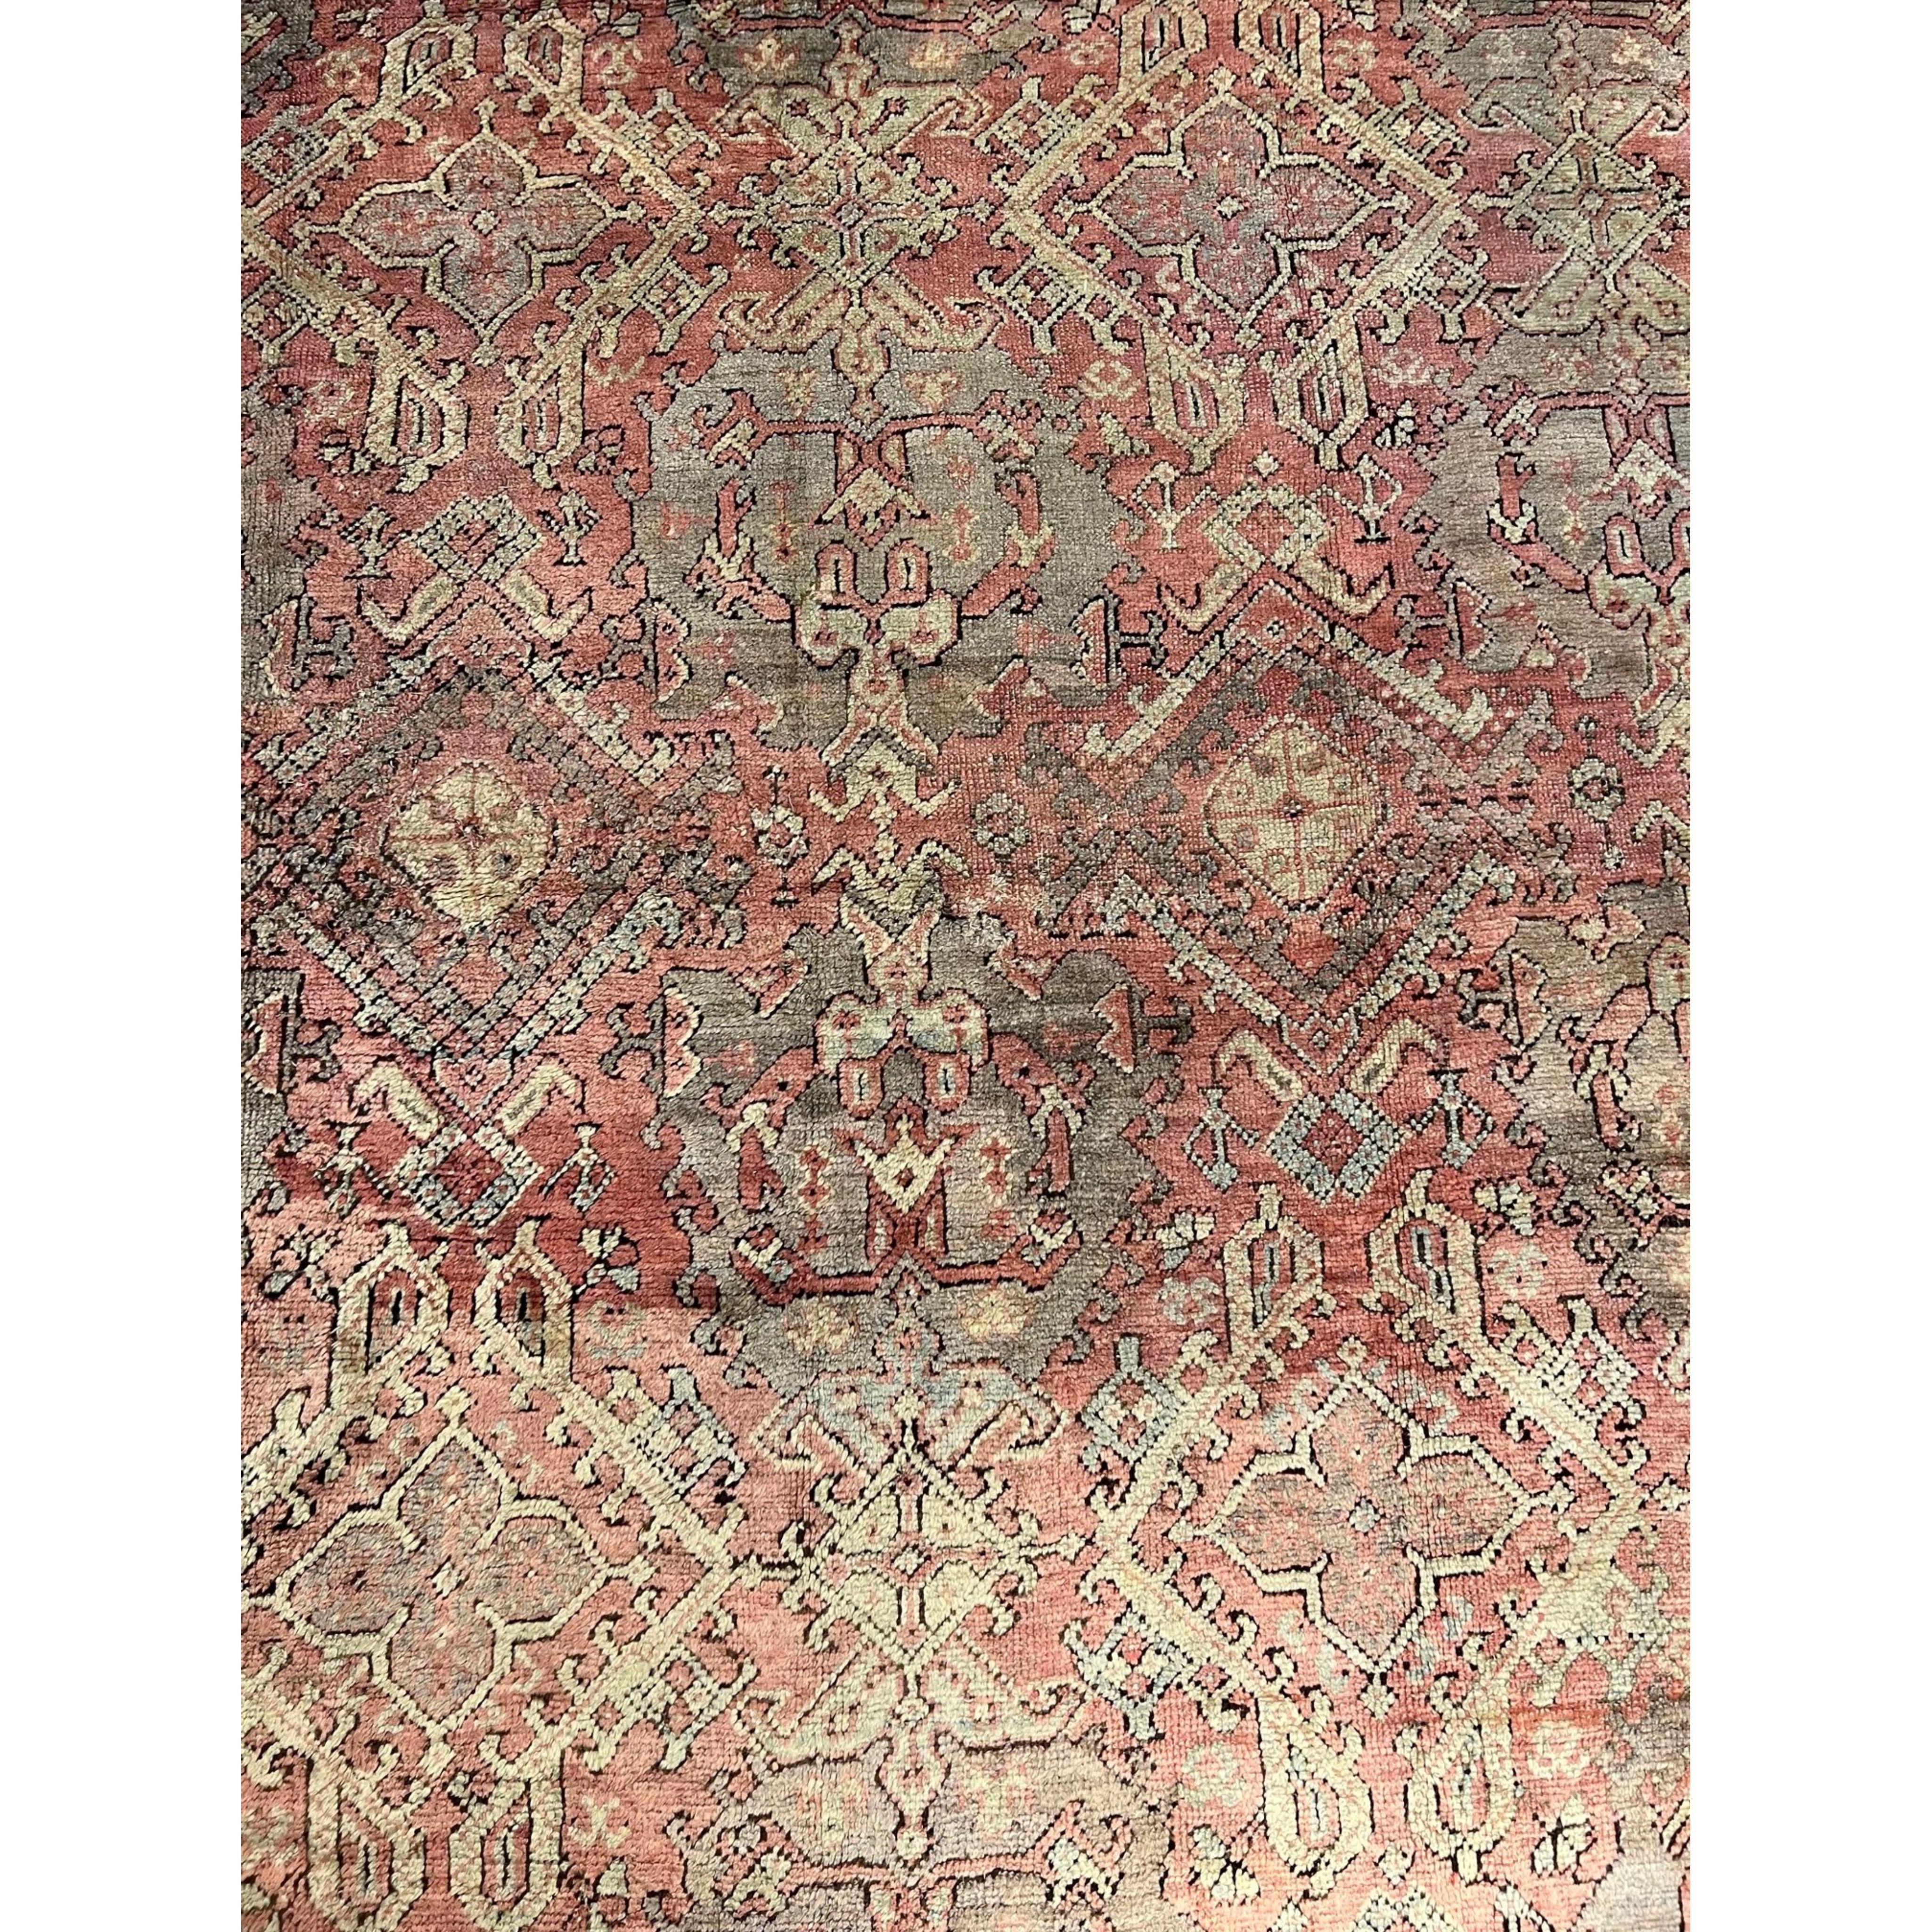 Antique Oushak Rug 15.9x12 In Good Condition For Sale In Los Angeles, US